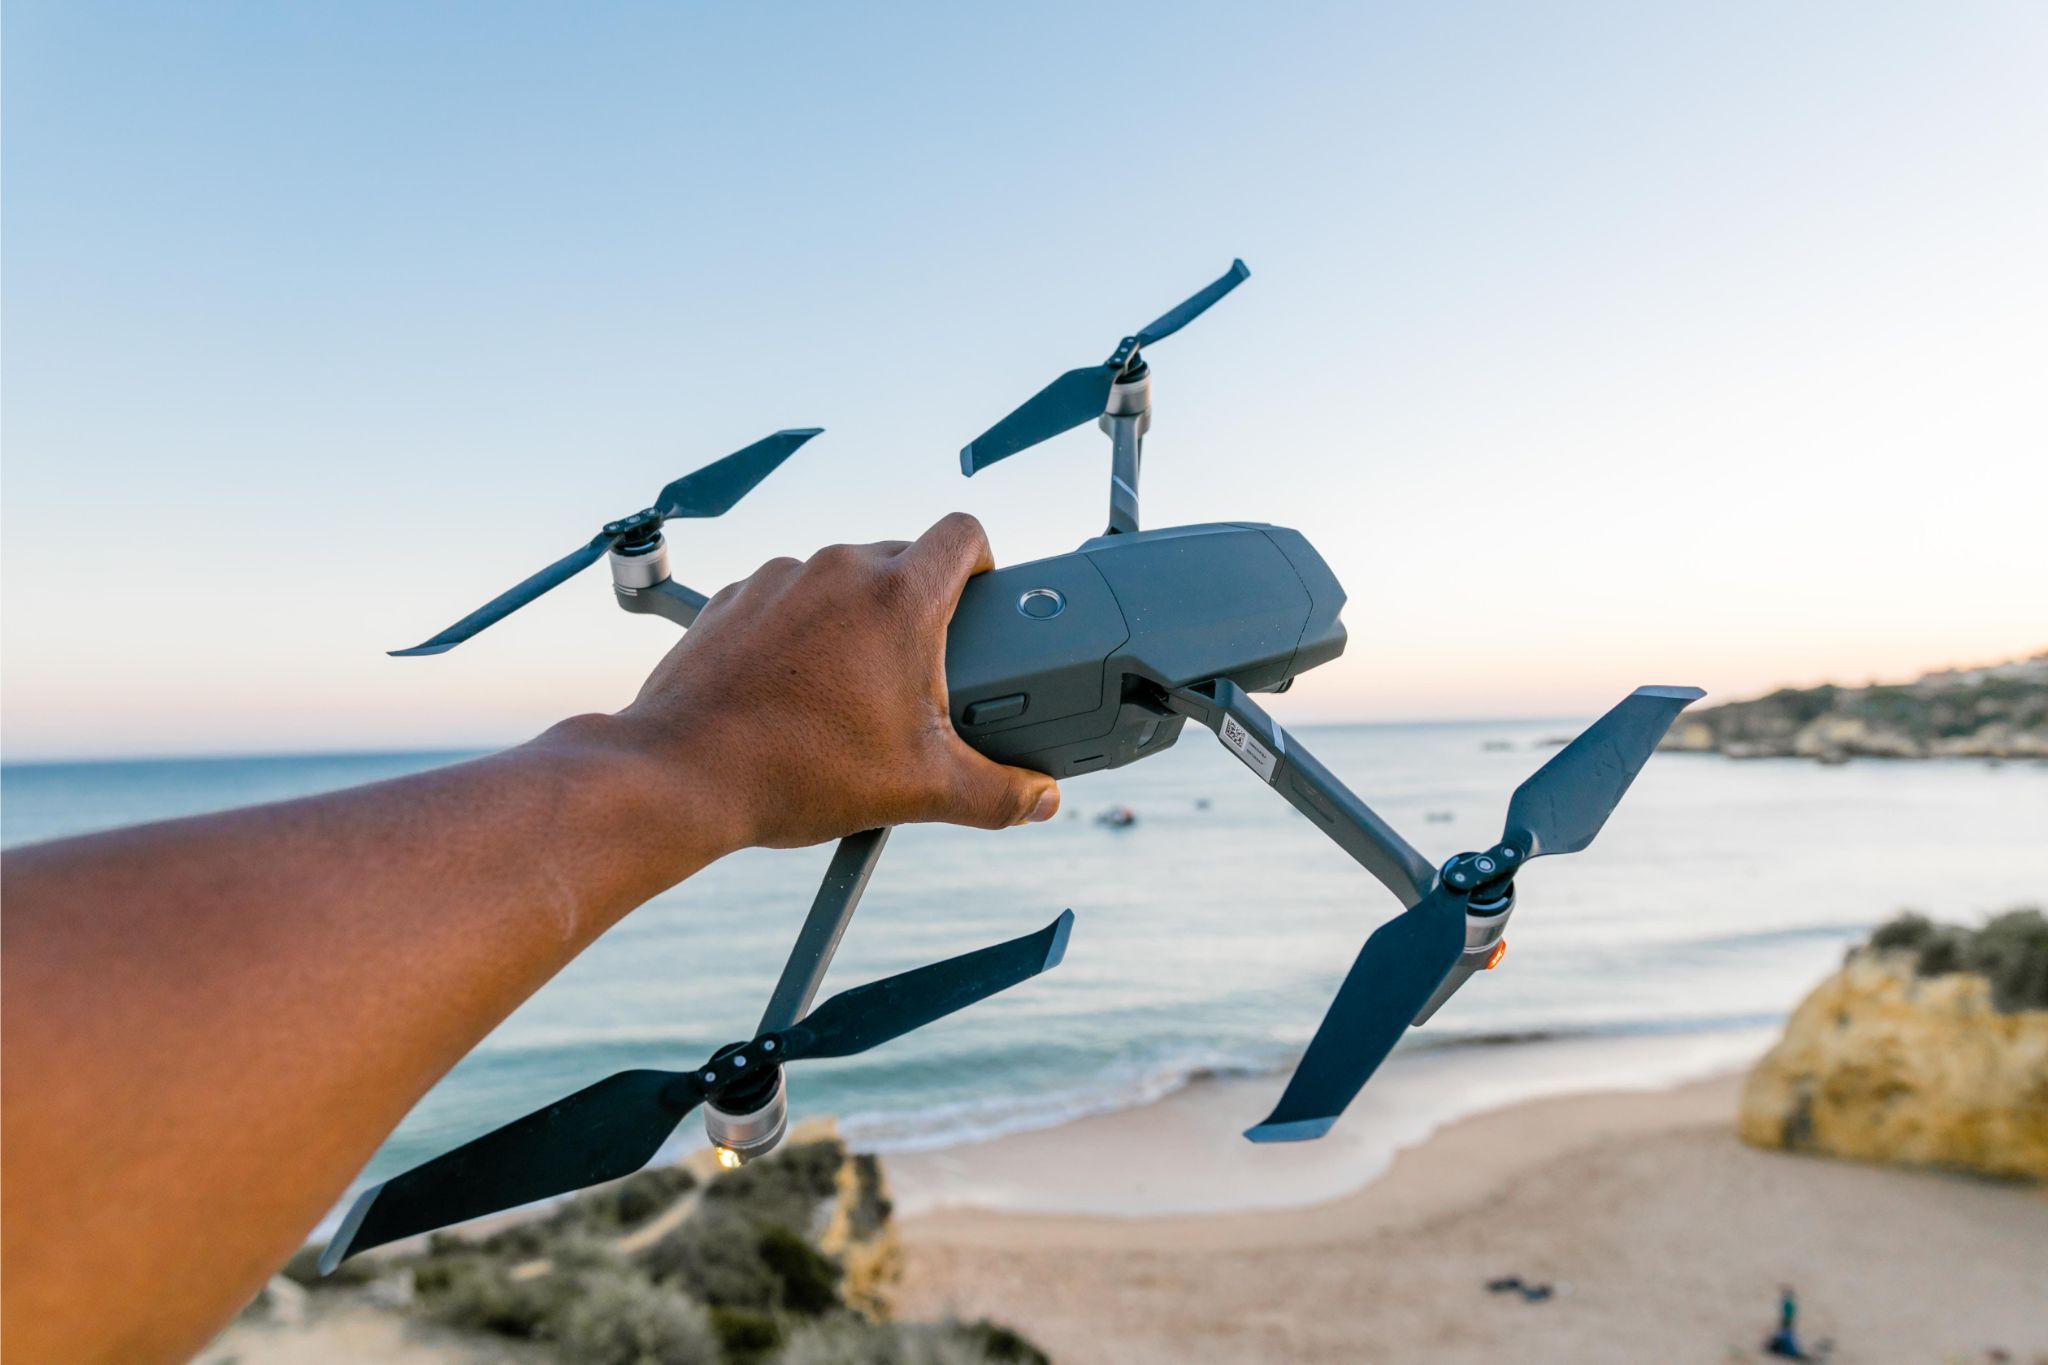 Hand holding a quadcopter and beach on the background